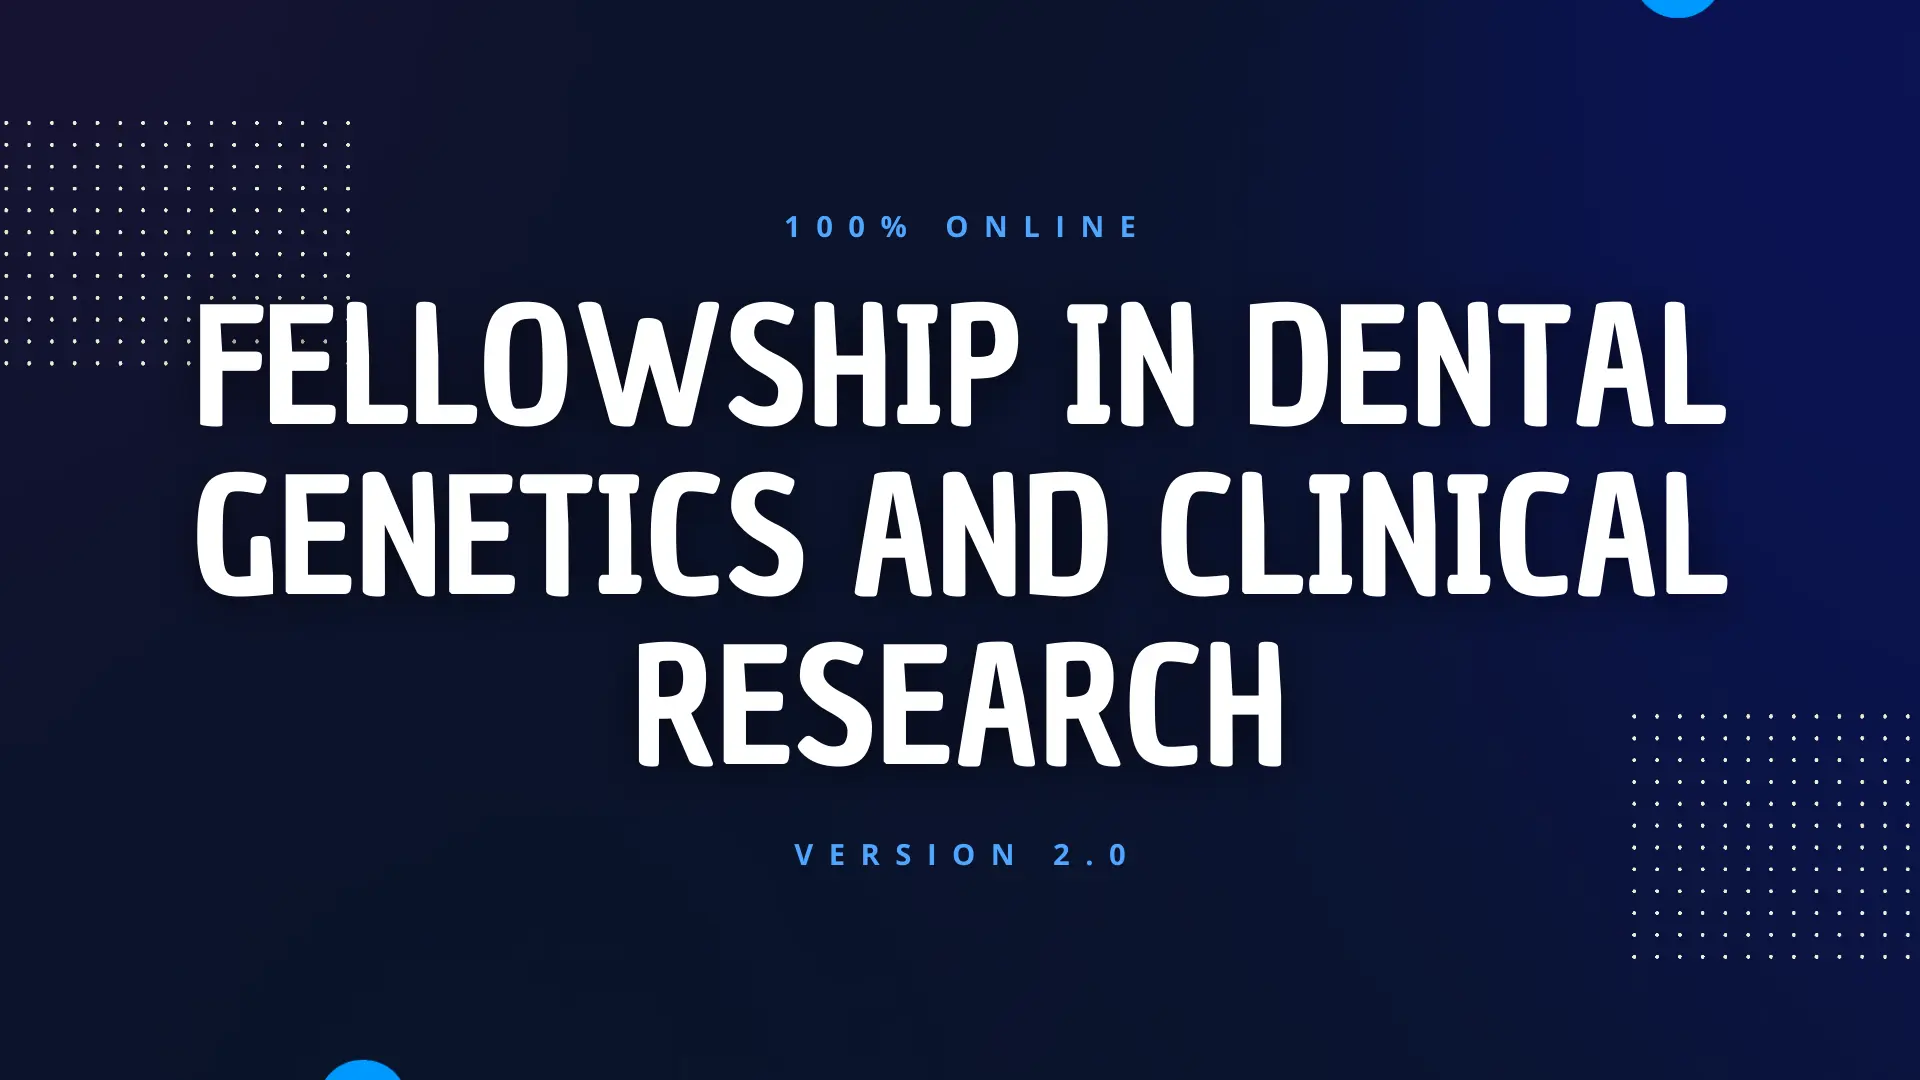 Fellowship In Dental Genetics And Clinical Research Course For Beginners (Version 2.0)